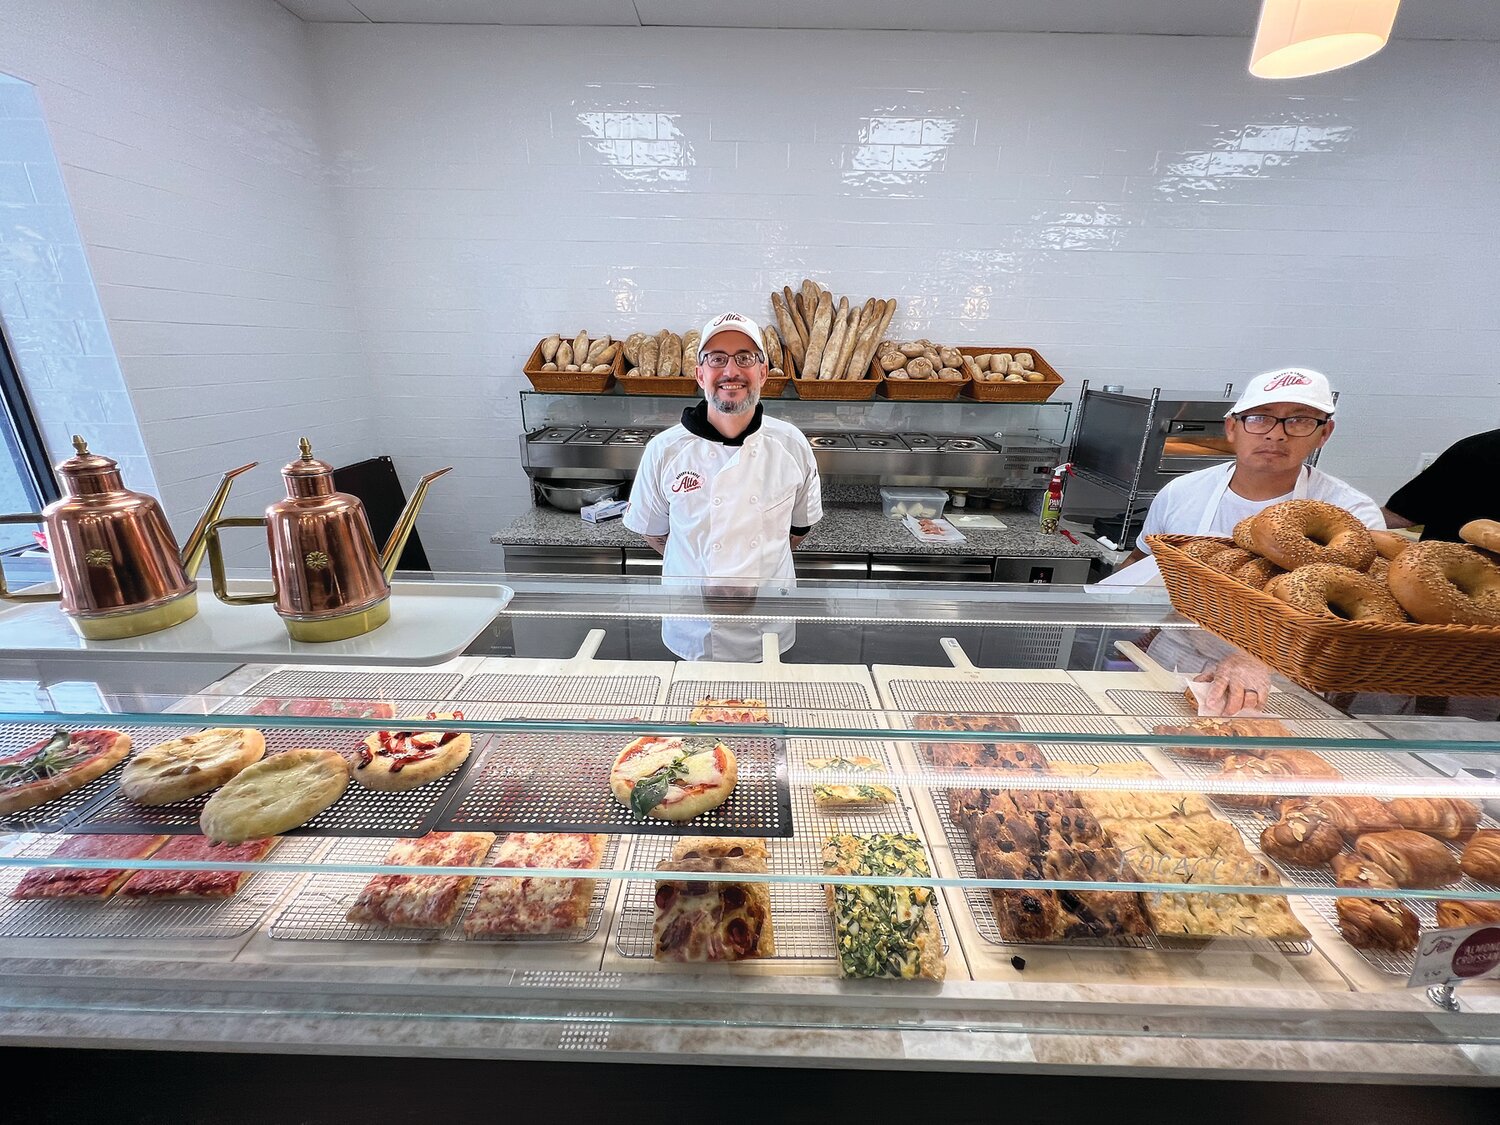 Savory focacci, pizza, croissants and more are among the many offerings at the new Alto Bakery & Caffé in Warminster.